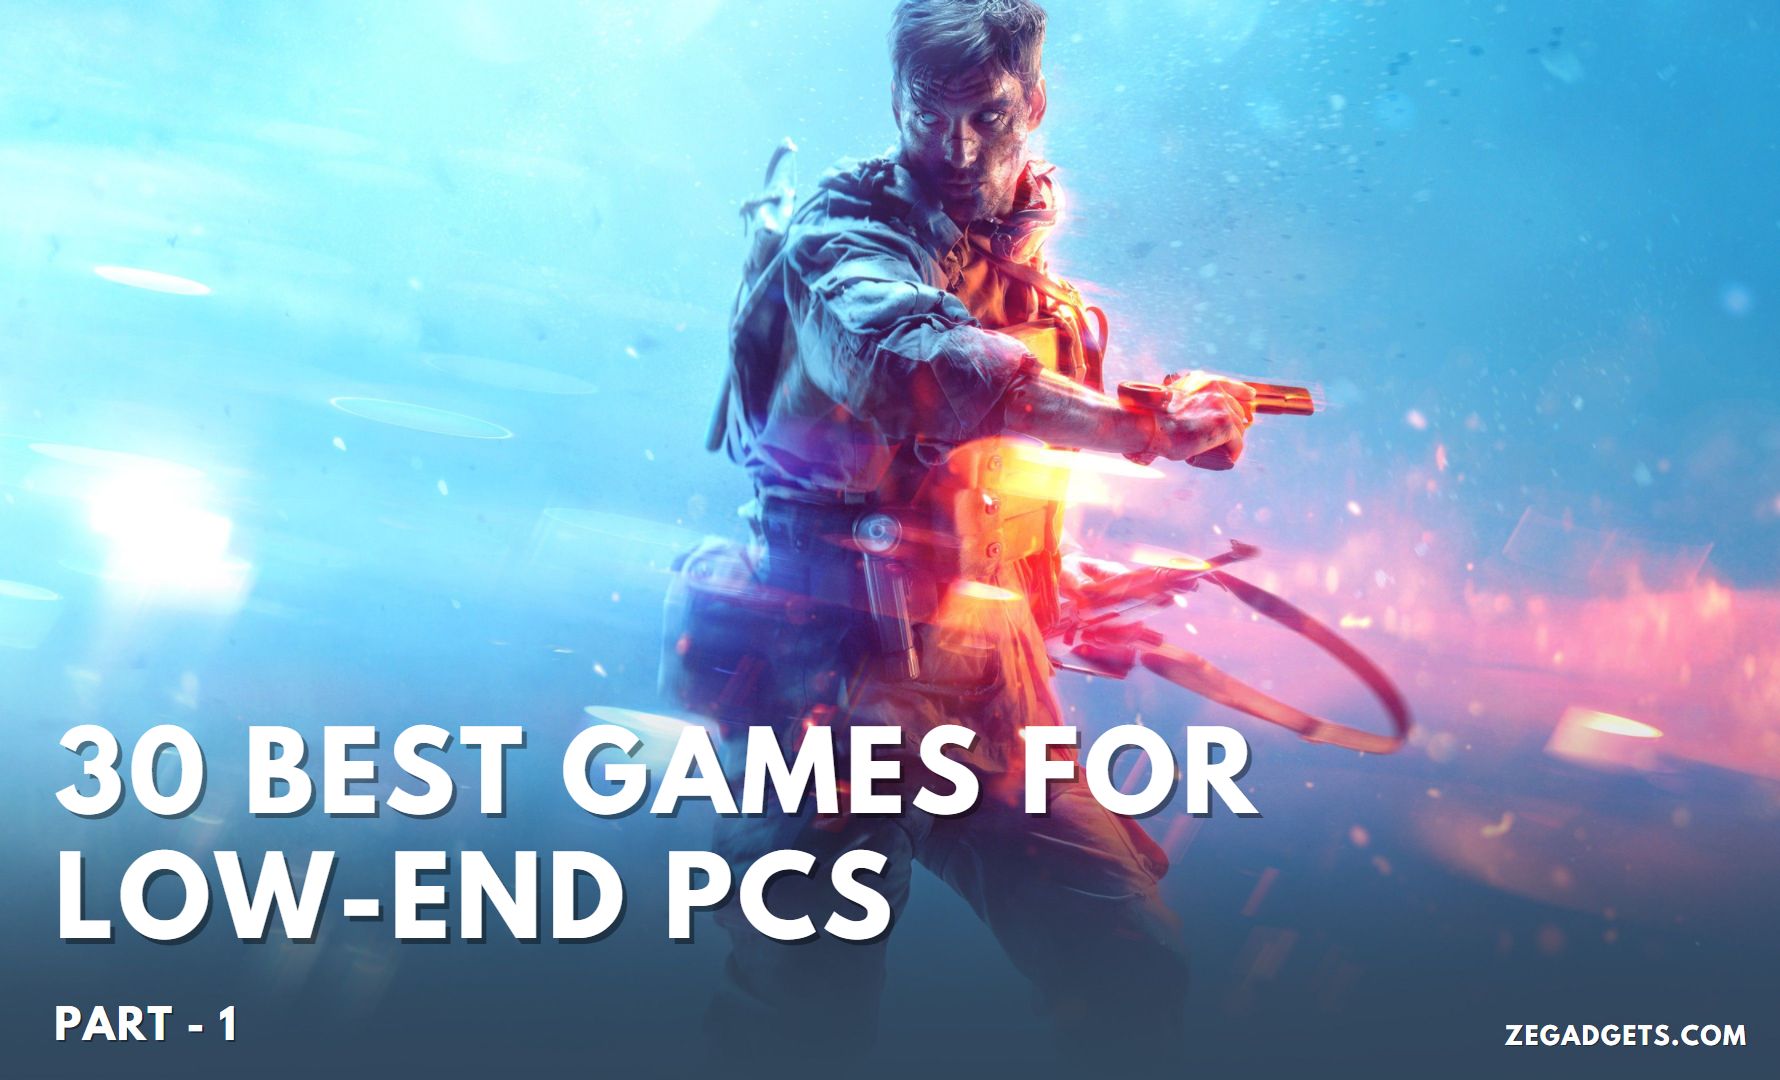 Top 8 Free PC Games for Low-End Computers - FotoLog